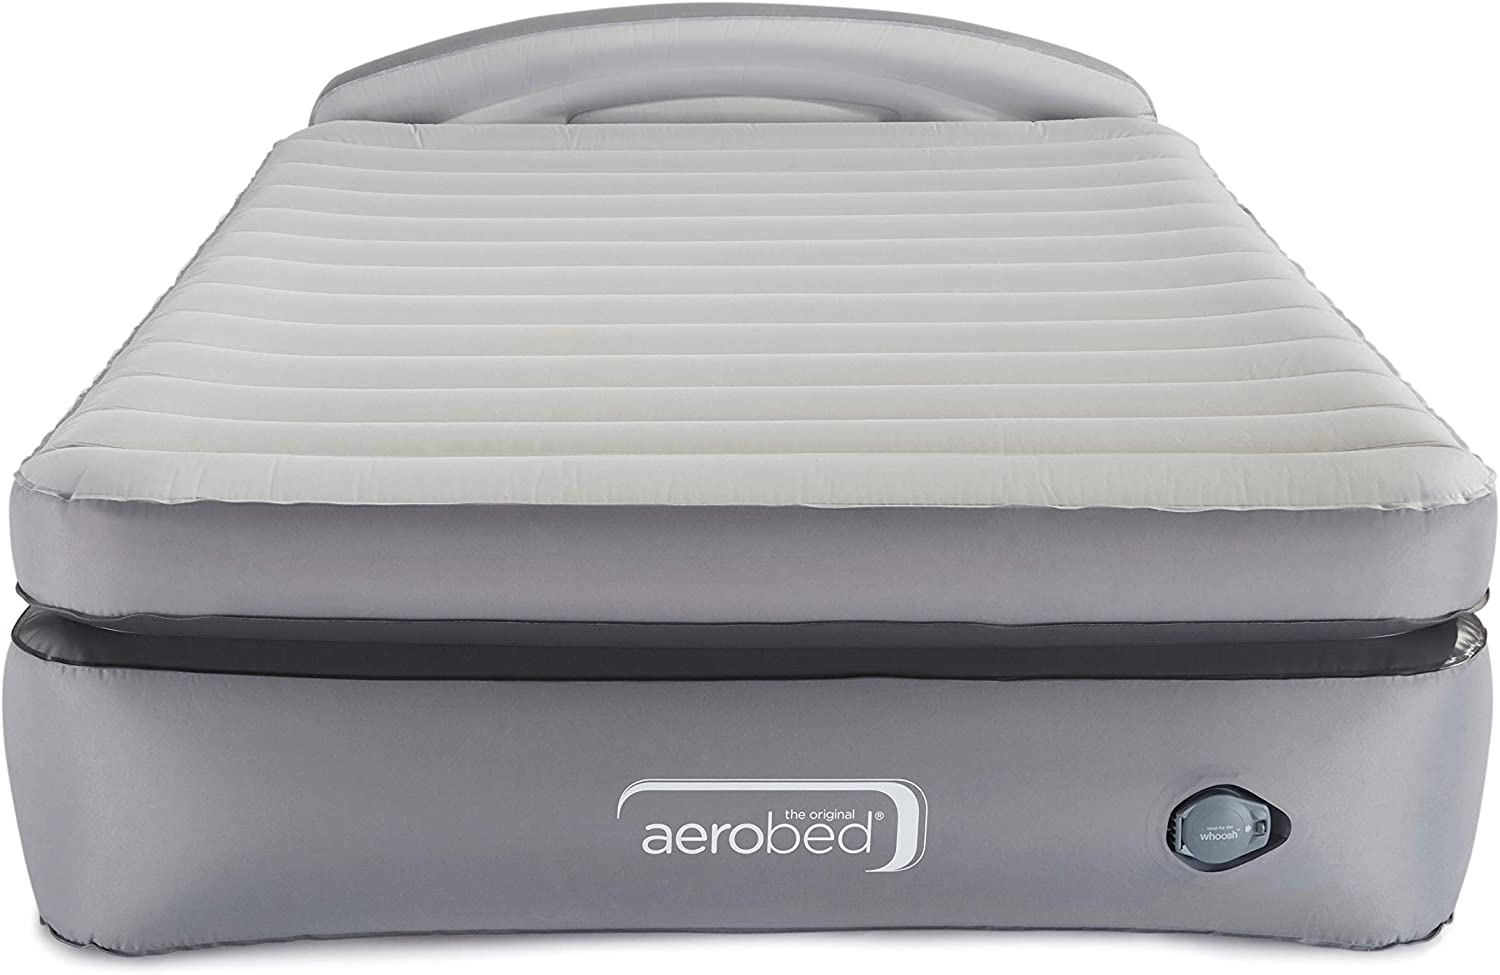 The first thing to do if an air bed has a lump, is to let some of the air out and to put pressure on the lump.